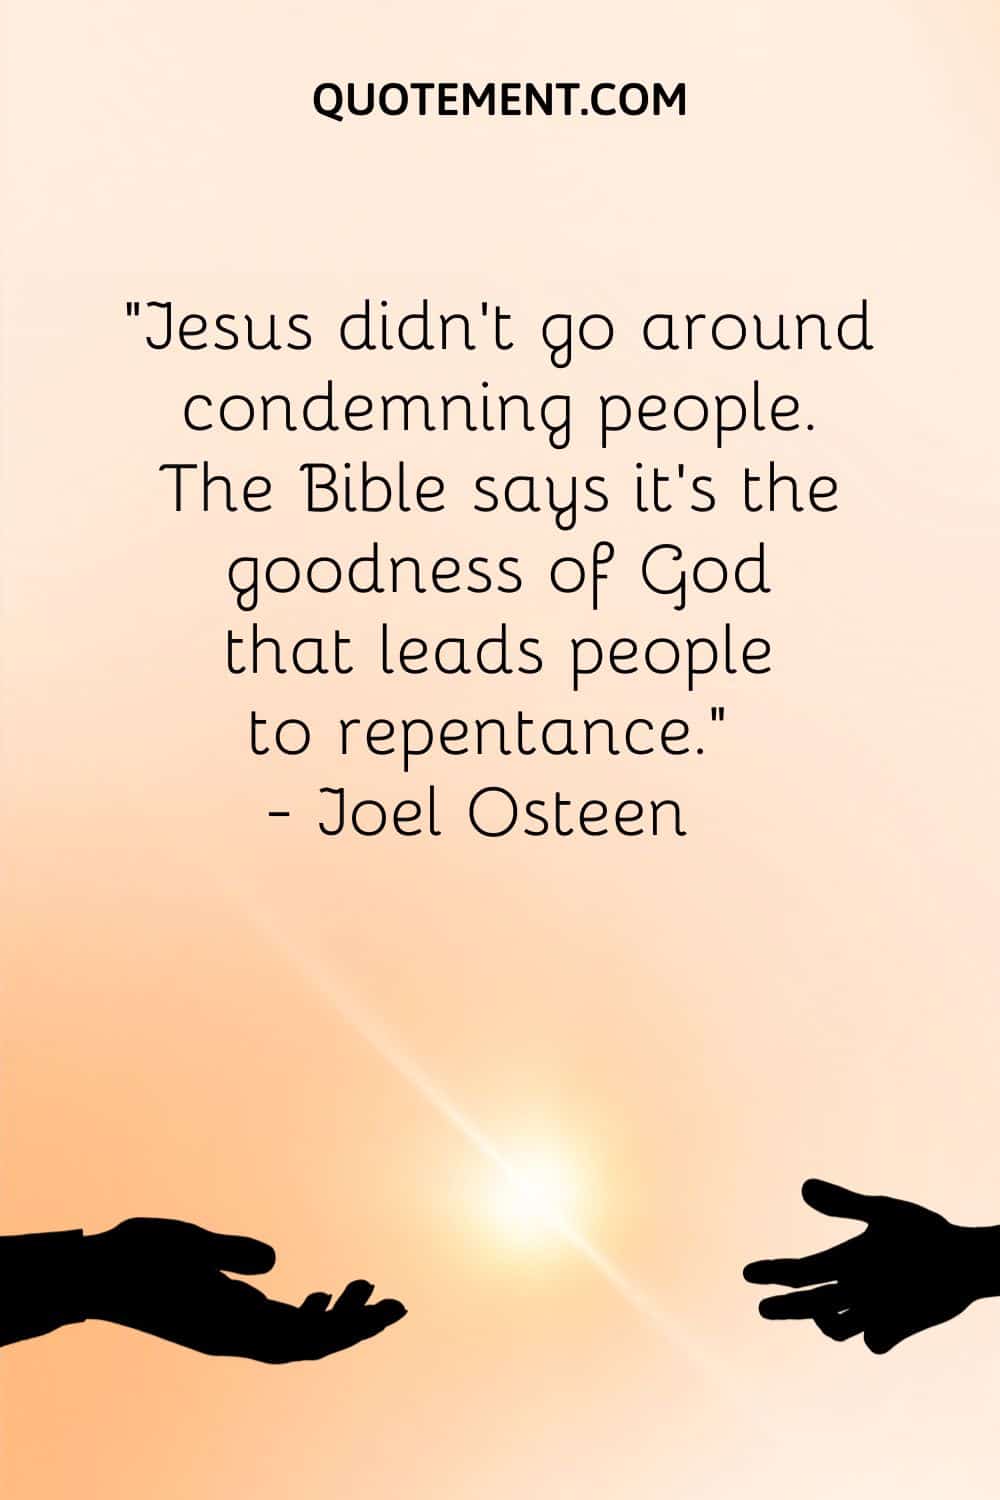 “Jesus didn’t go around condemning people. The Bible says it’s the goodness of God that leads people to repentance.” ― Joel Osteen